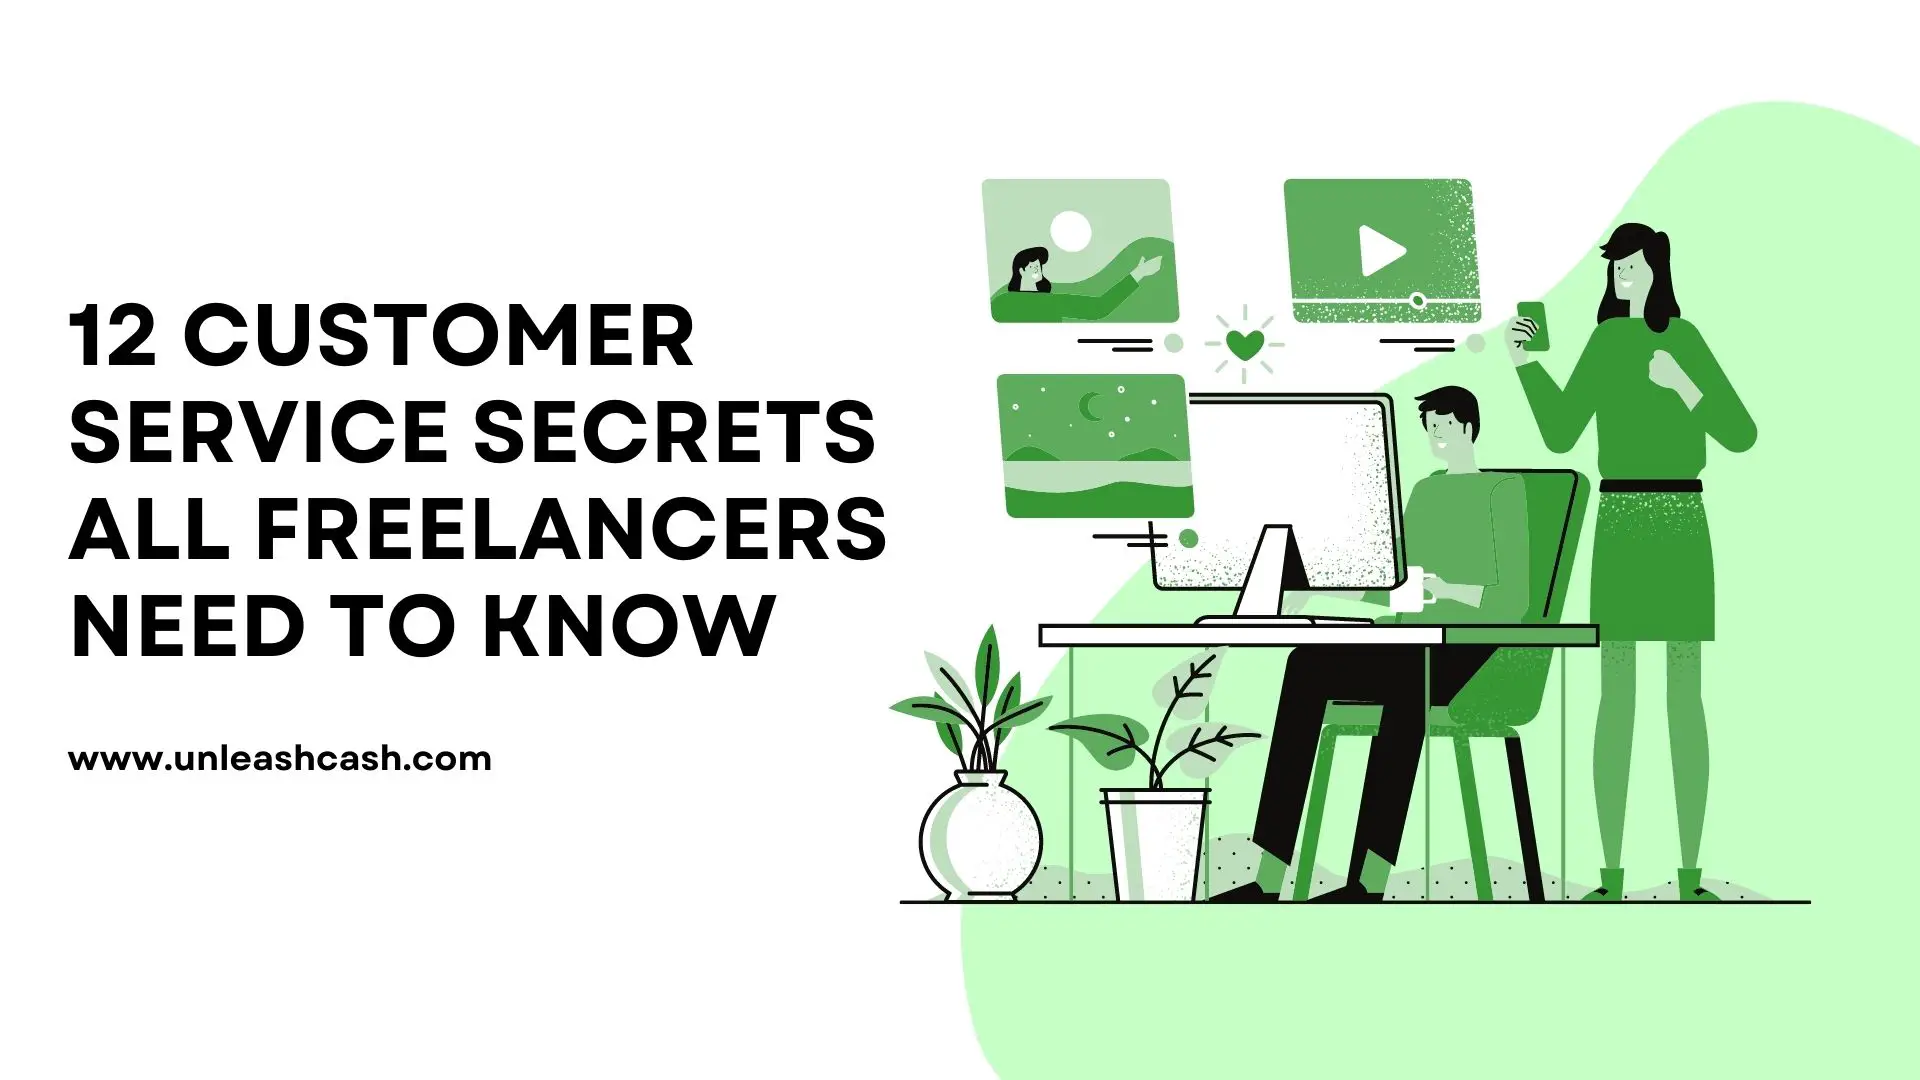 12 Customer Service Secrets All Freelancers Need To Know